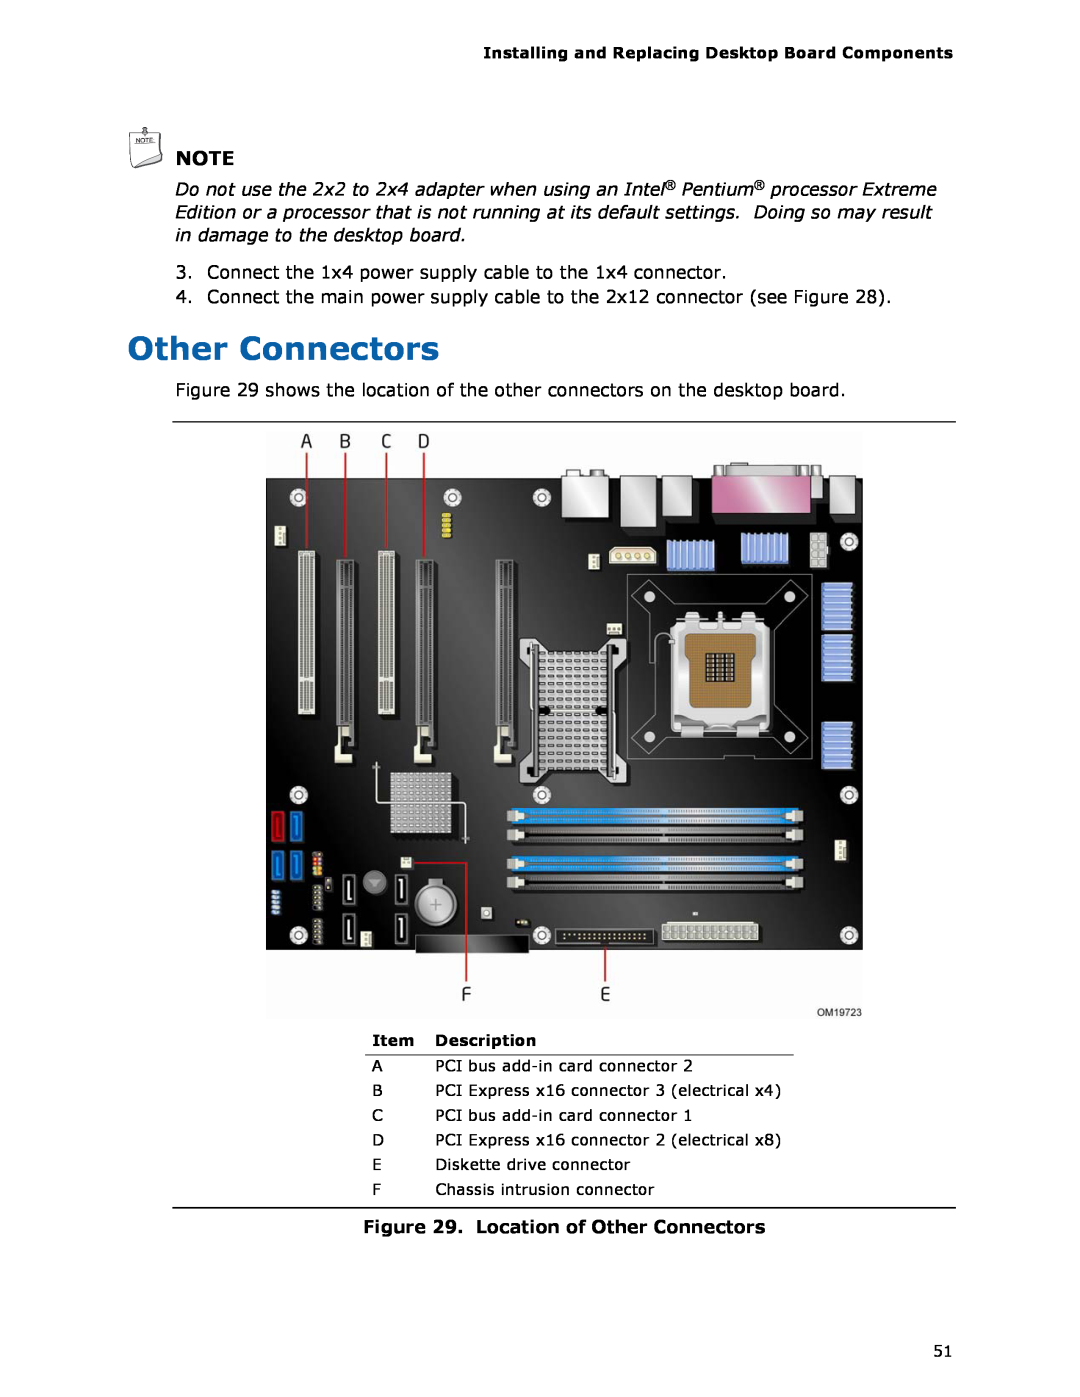 Intel D975XBX2 manual Location of Other Connectors 